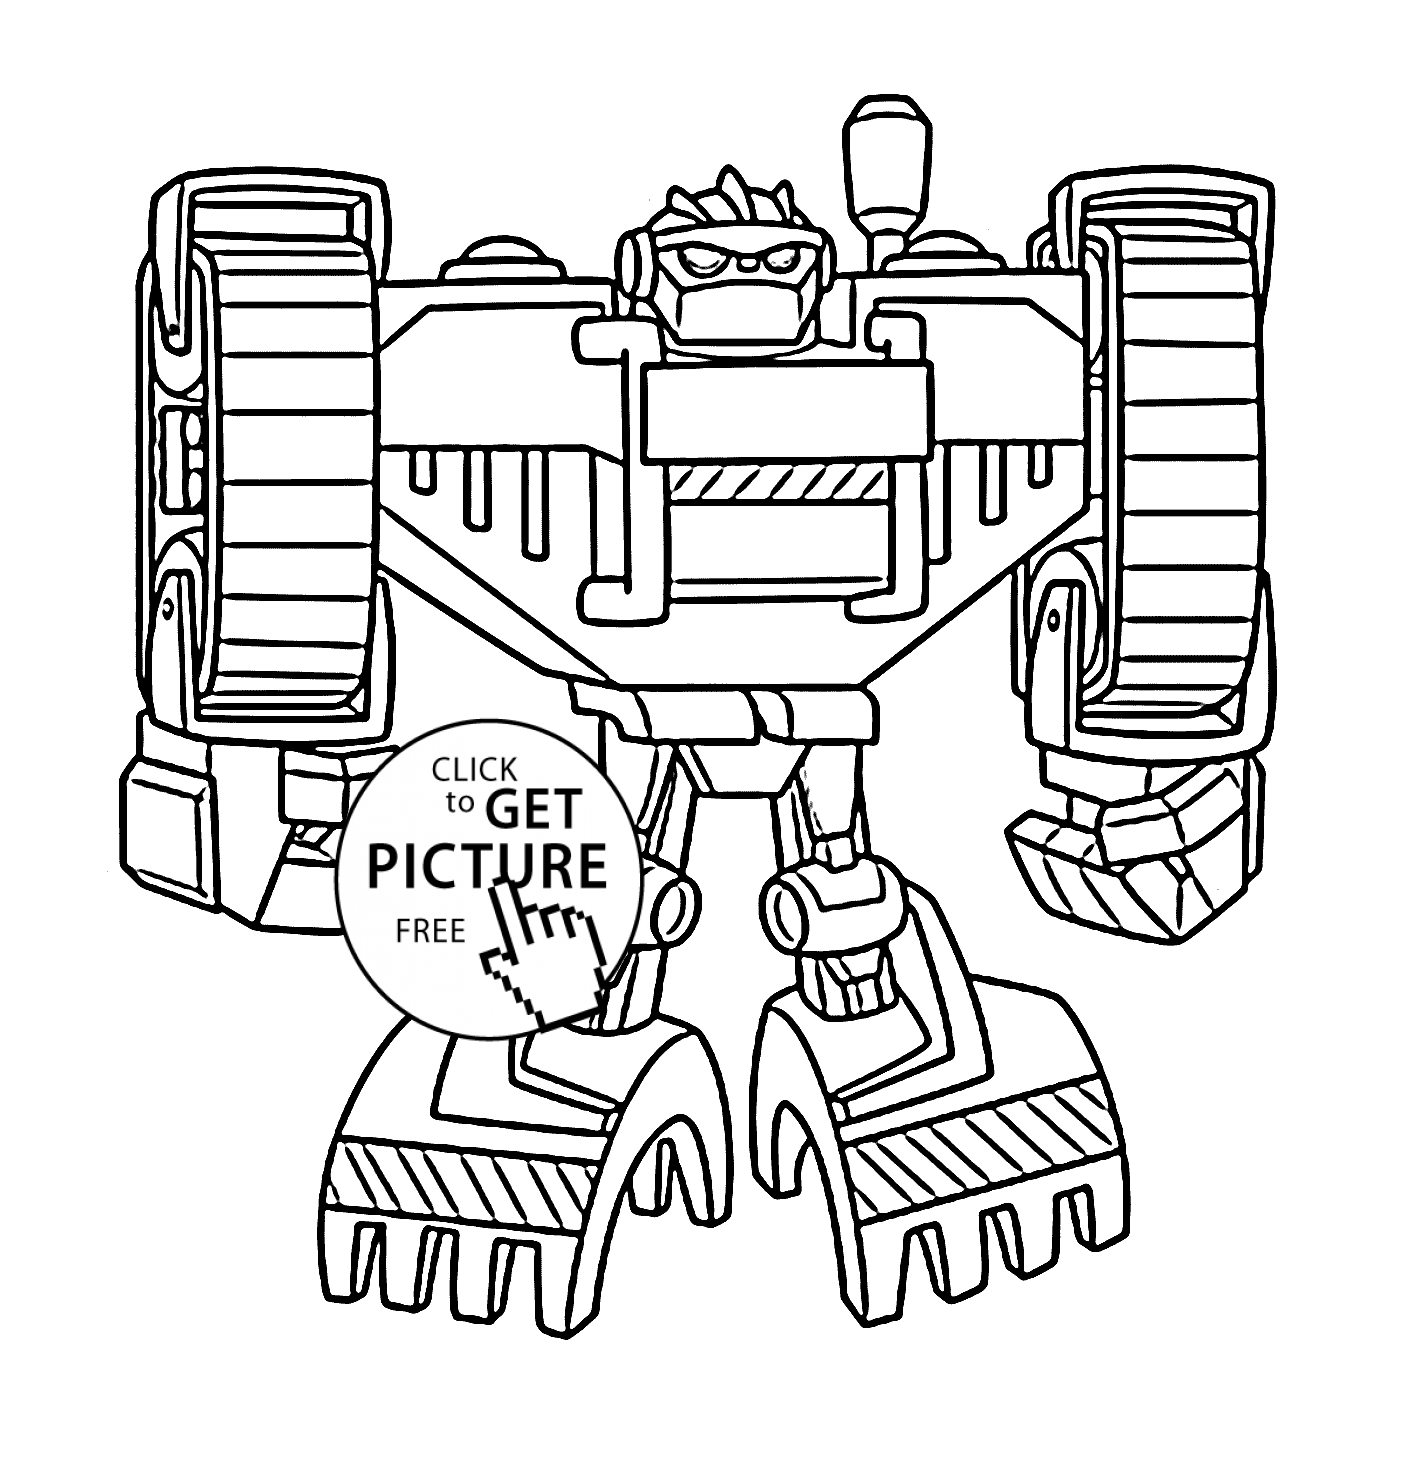 Boulder bot coloring pages for kids, printable free - Rescue bots ...